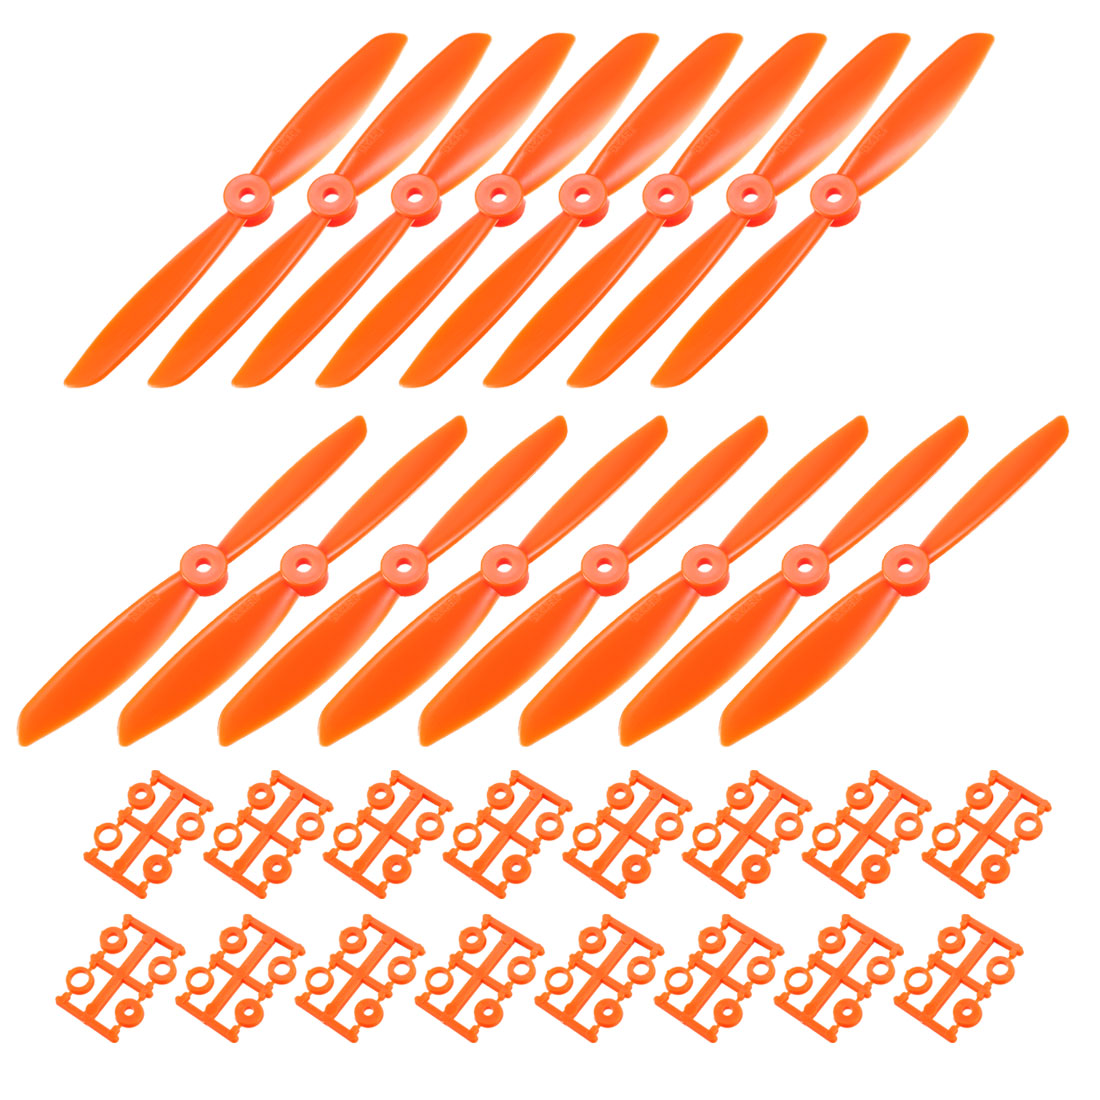 uxcell Uxcell RC Propellers  C 6045 6x4.5 Inch 2-Vane Quadcopter for Airplane Toy, Nylon Orange 8 Pairs with Adapter Rings